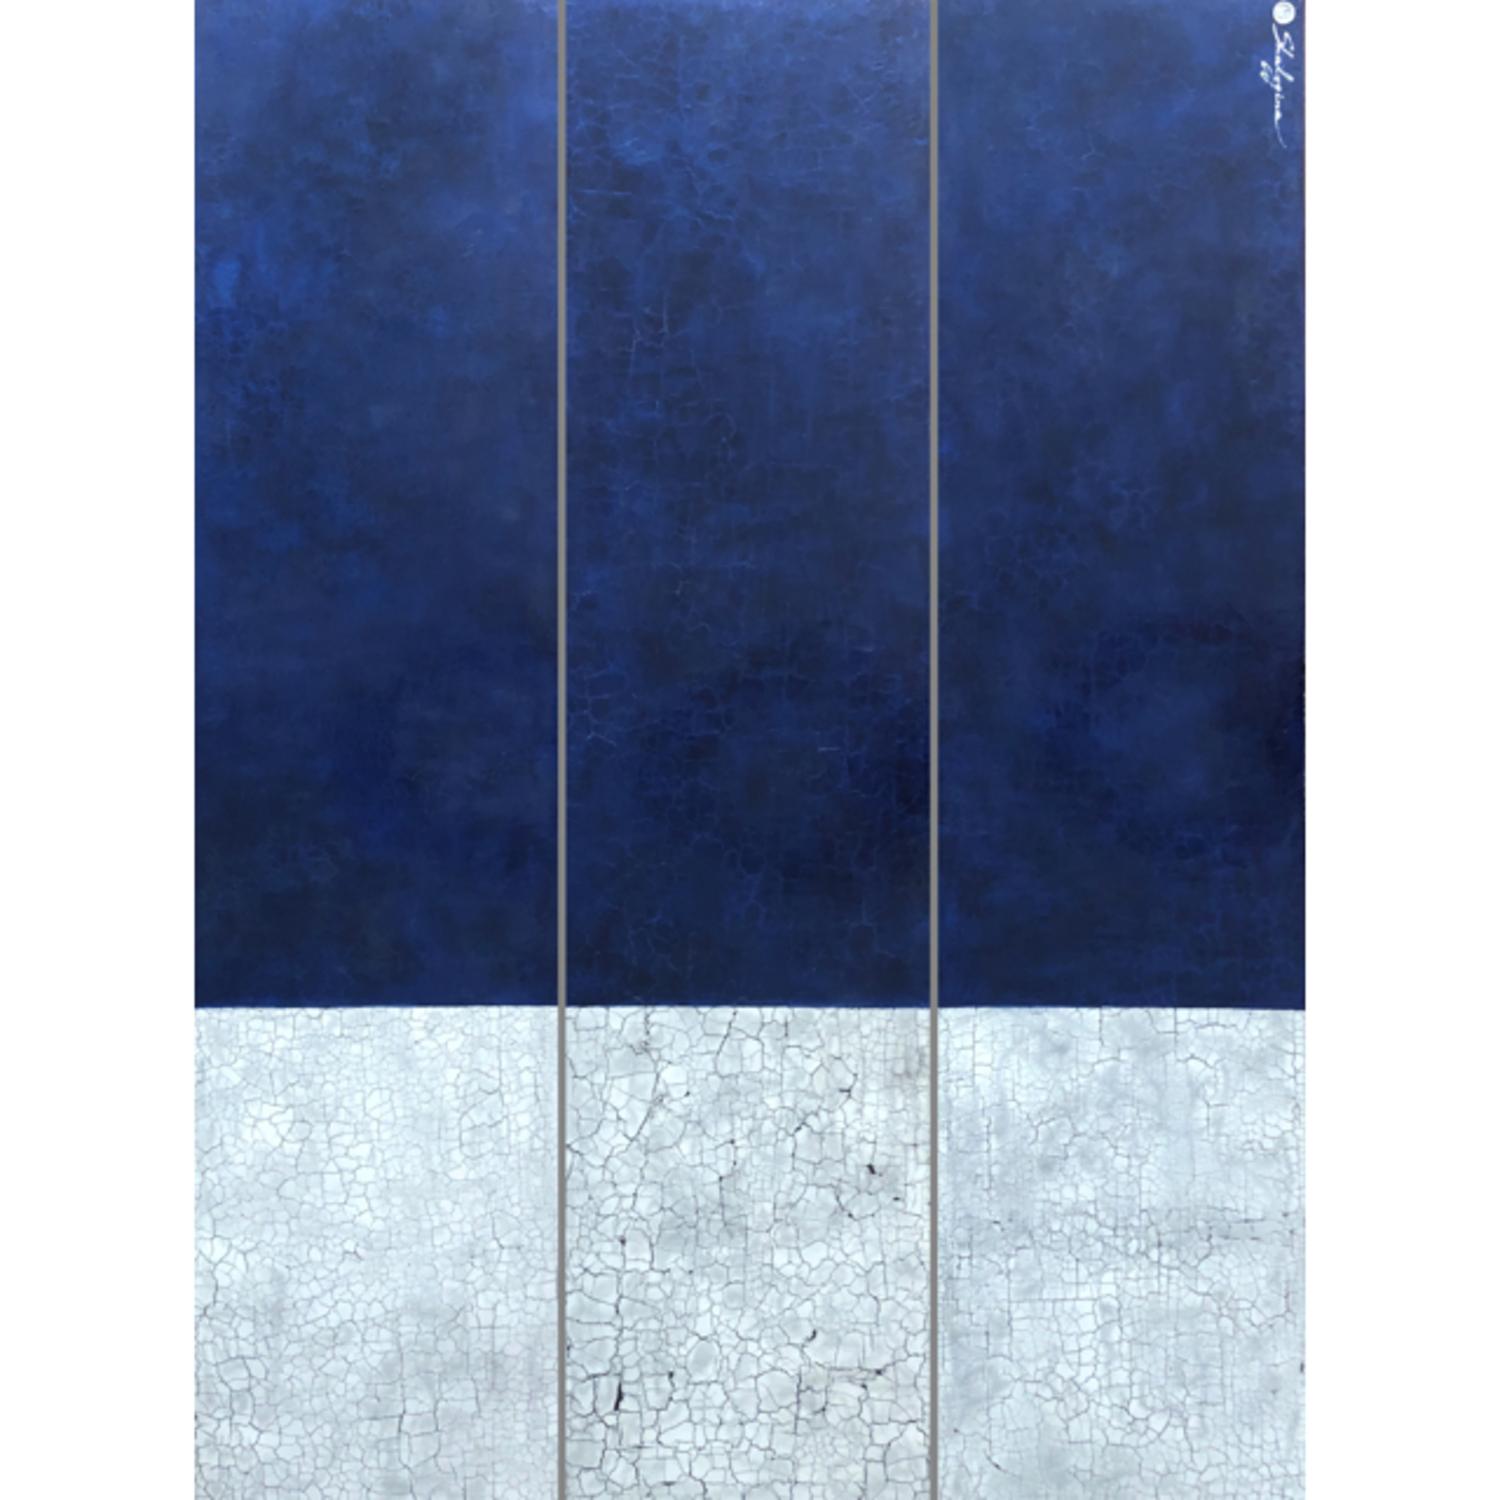 Abstract Minimalist Blue White Textured Mixed Media Contemporary Large 72x54